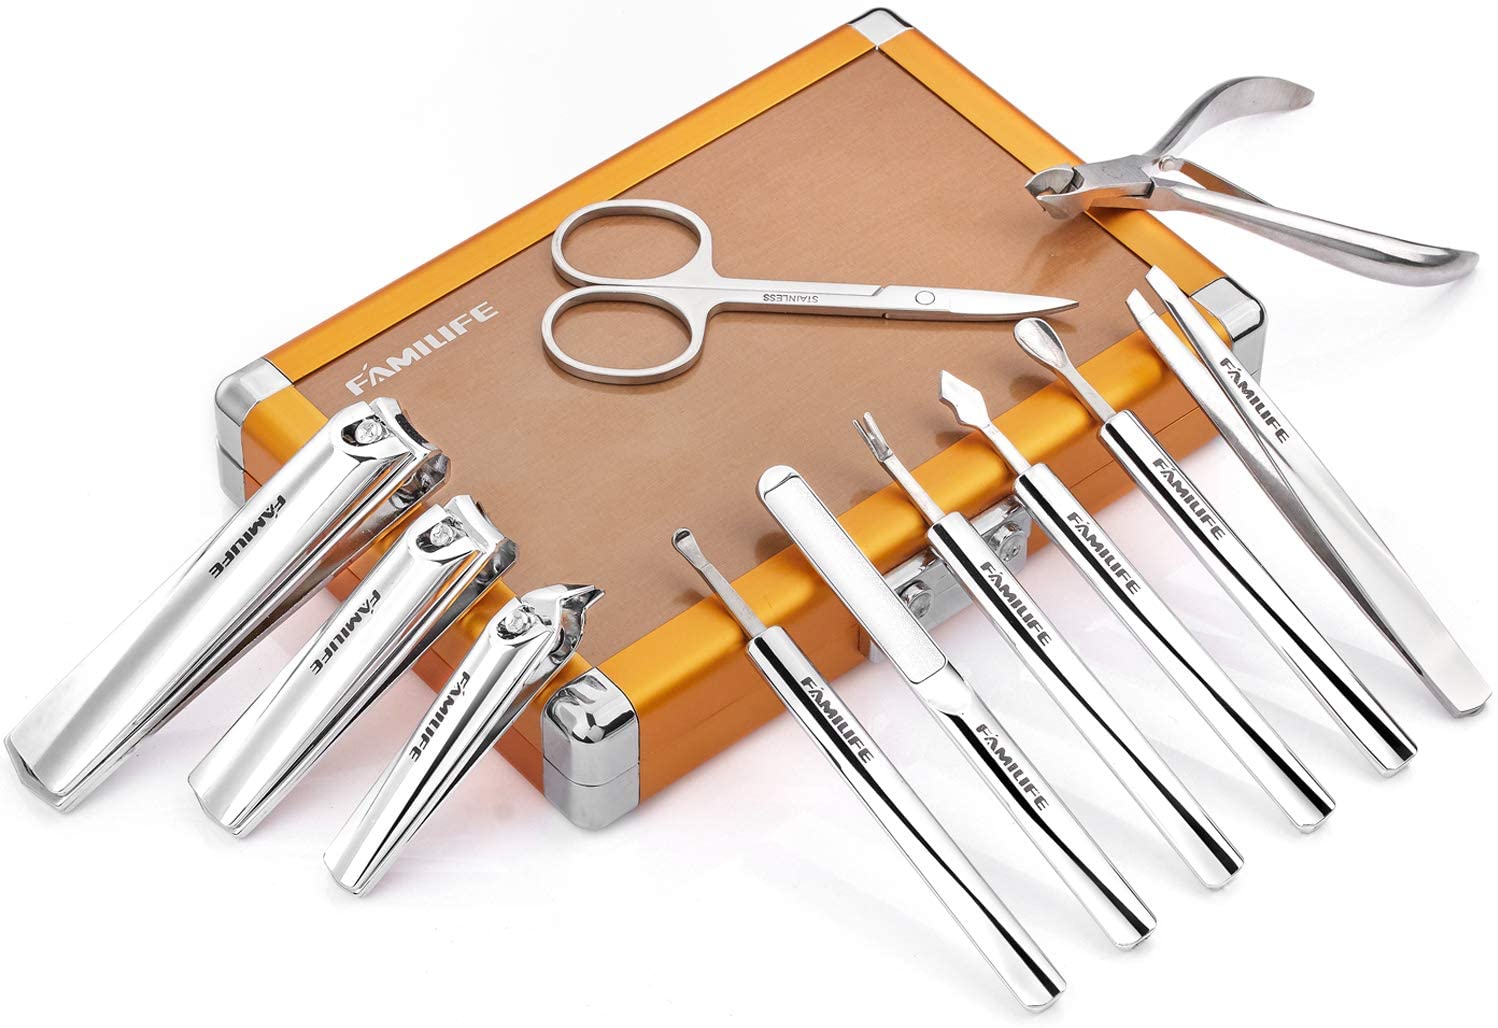 L05 Stainless Steel 11 In 1 Manicure Pedicure Set – Familife